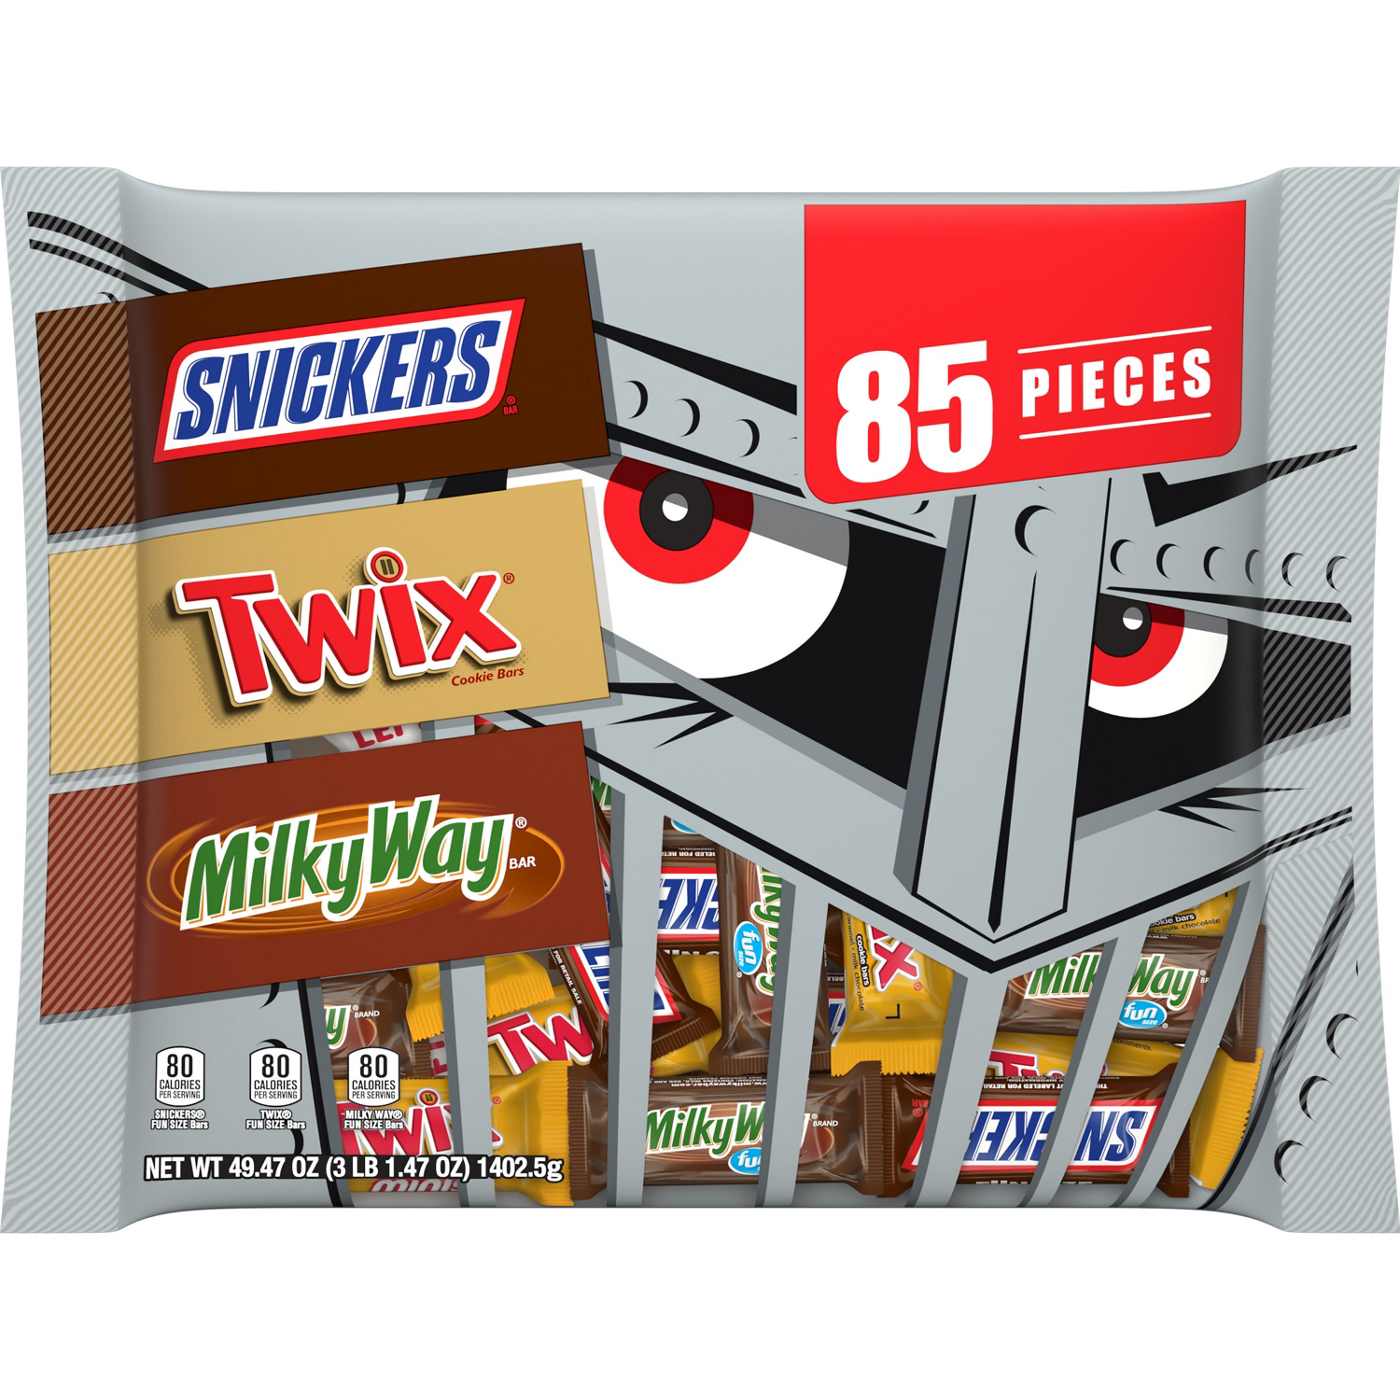 Snickers, Twix & Milky Way Assoted Fun Size Halloween Candy Bars; image 1 of 7